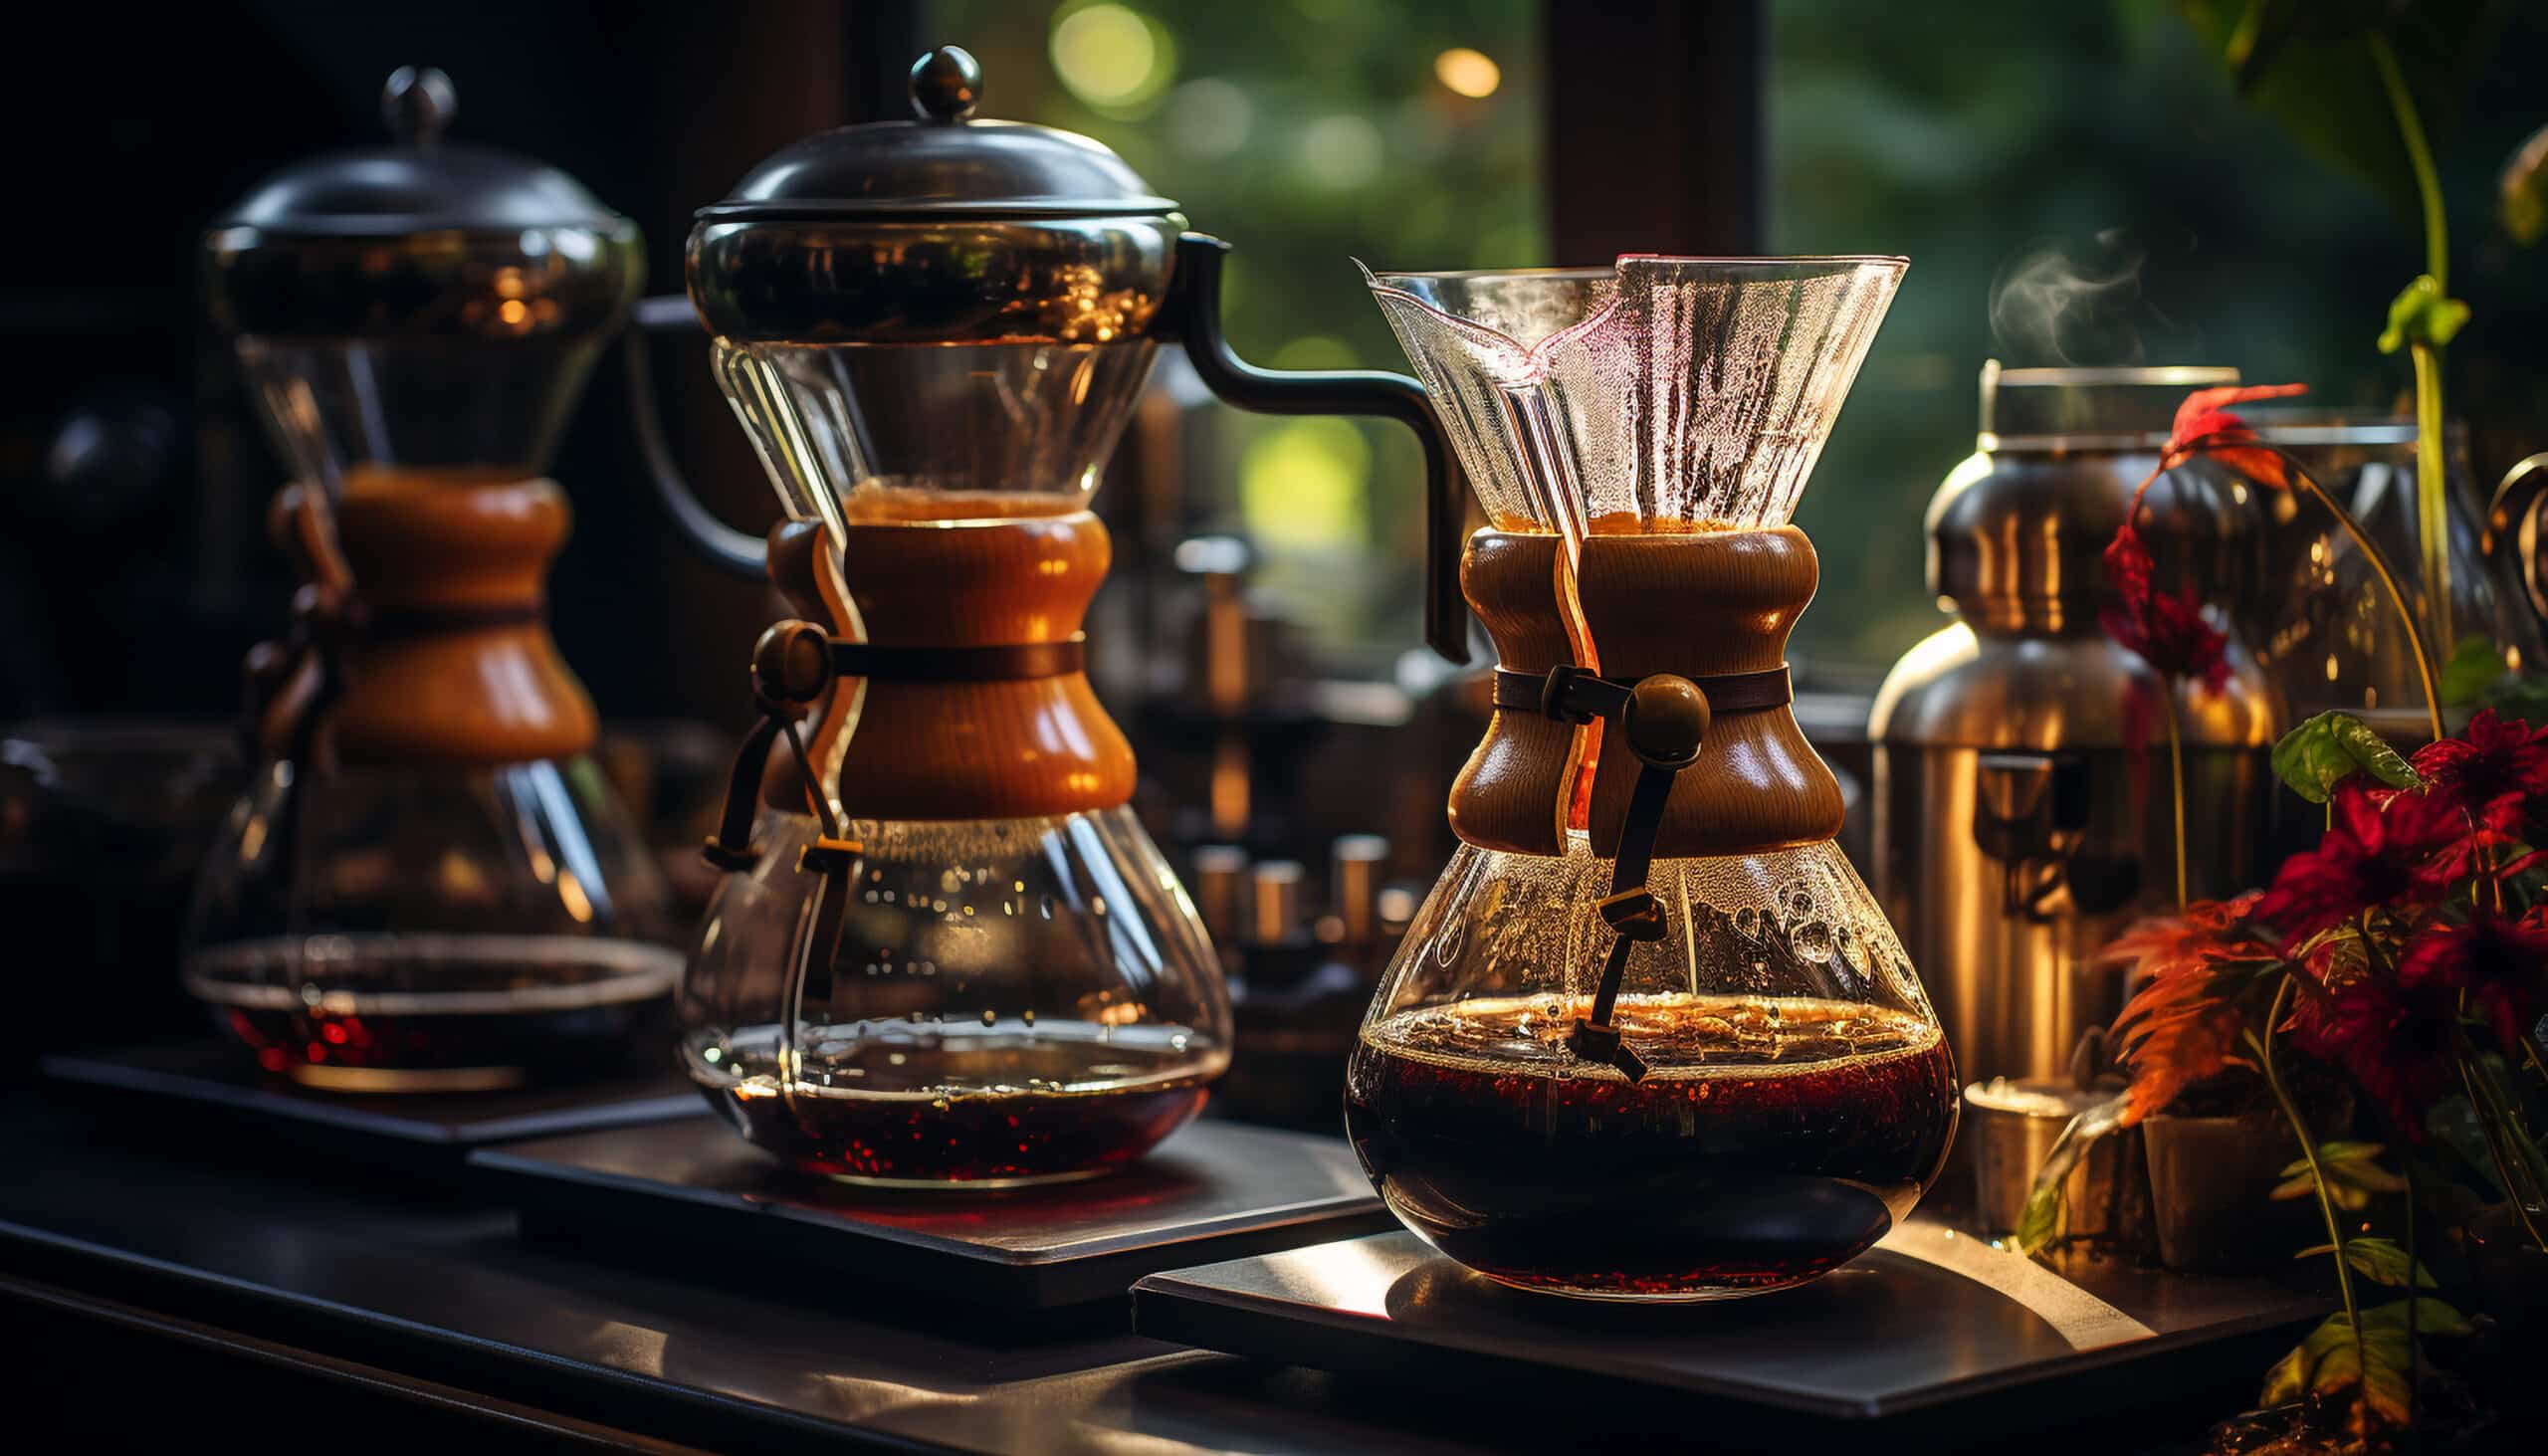 www.appr.com : How To Make Pour Over Coffee Chemex?